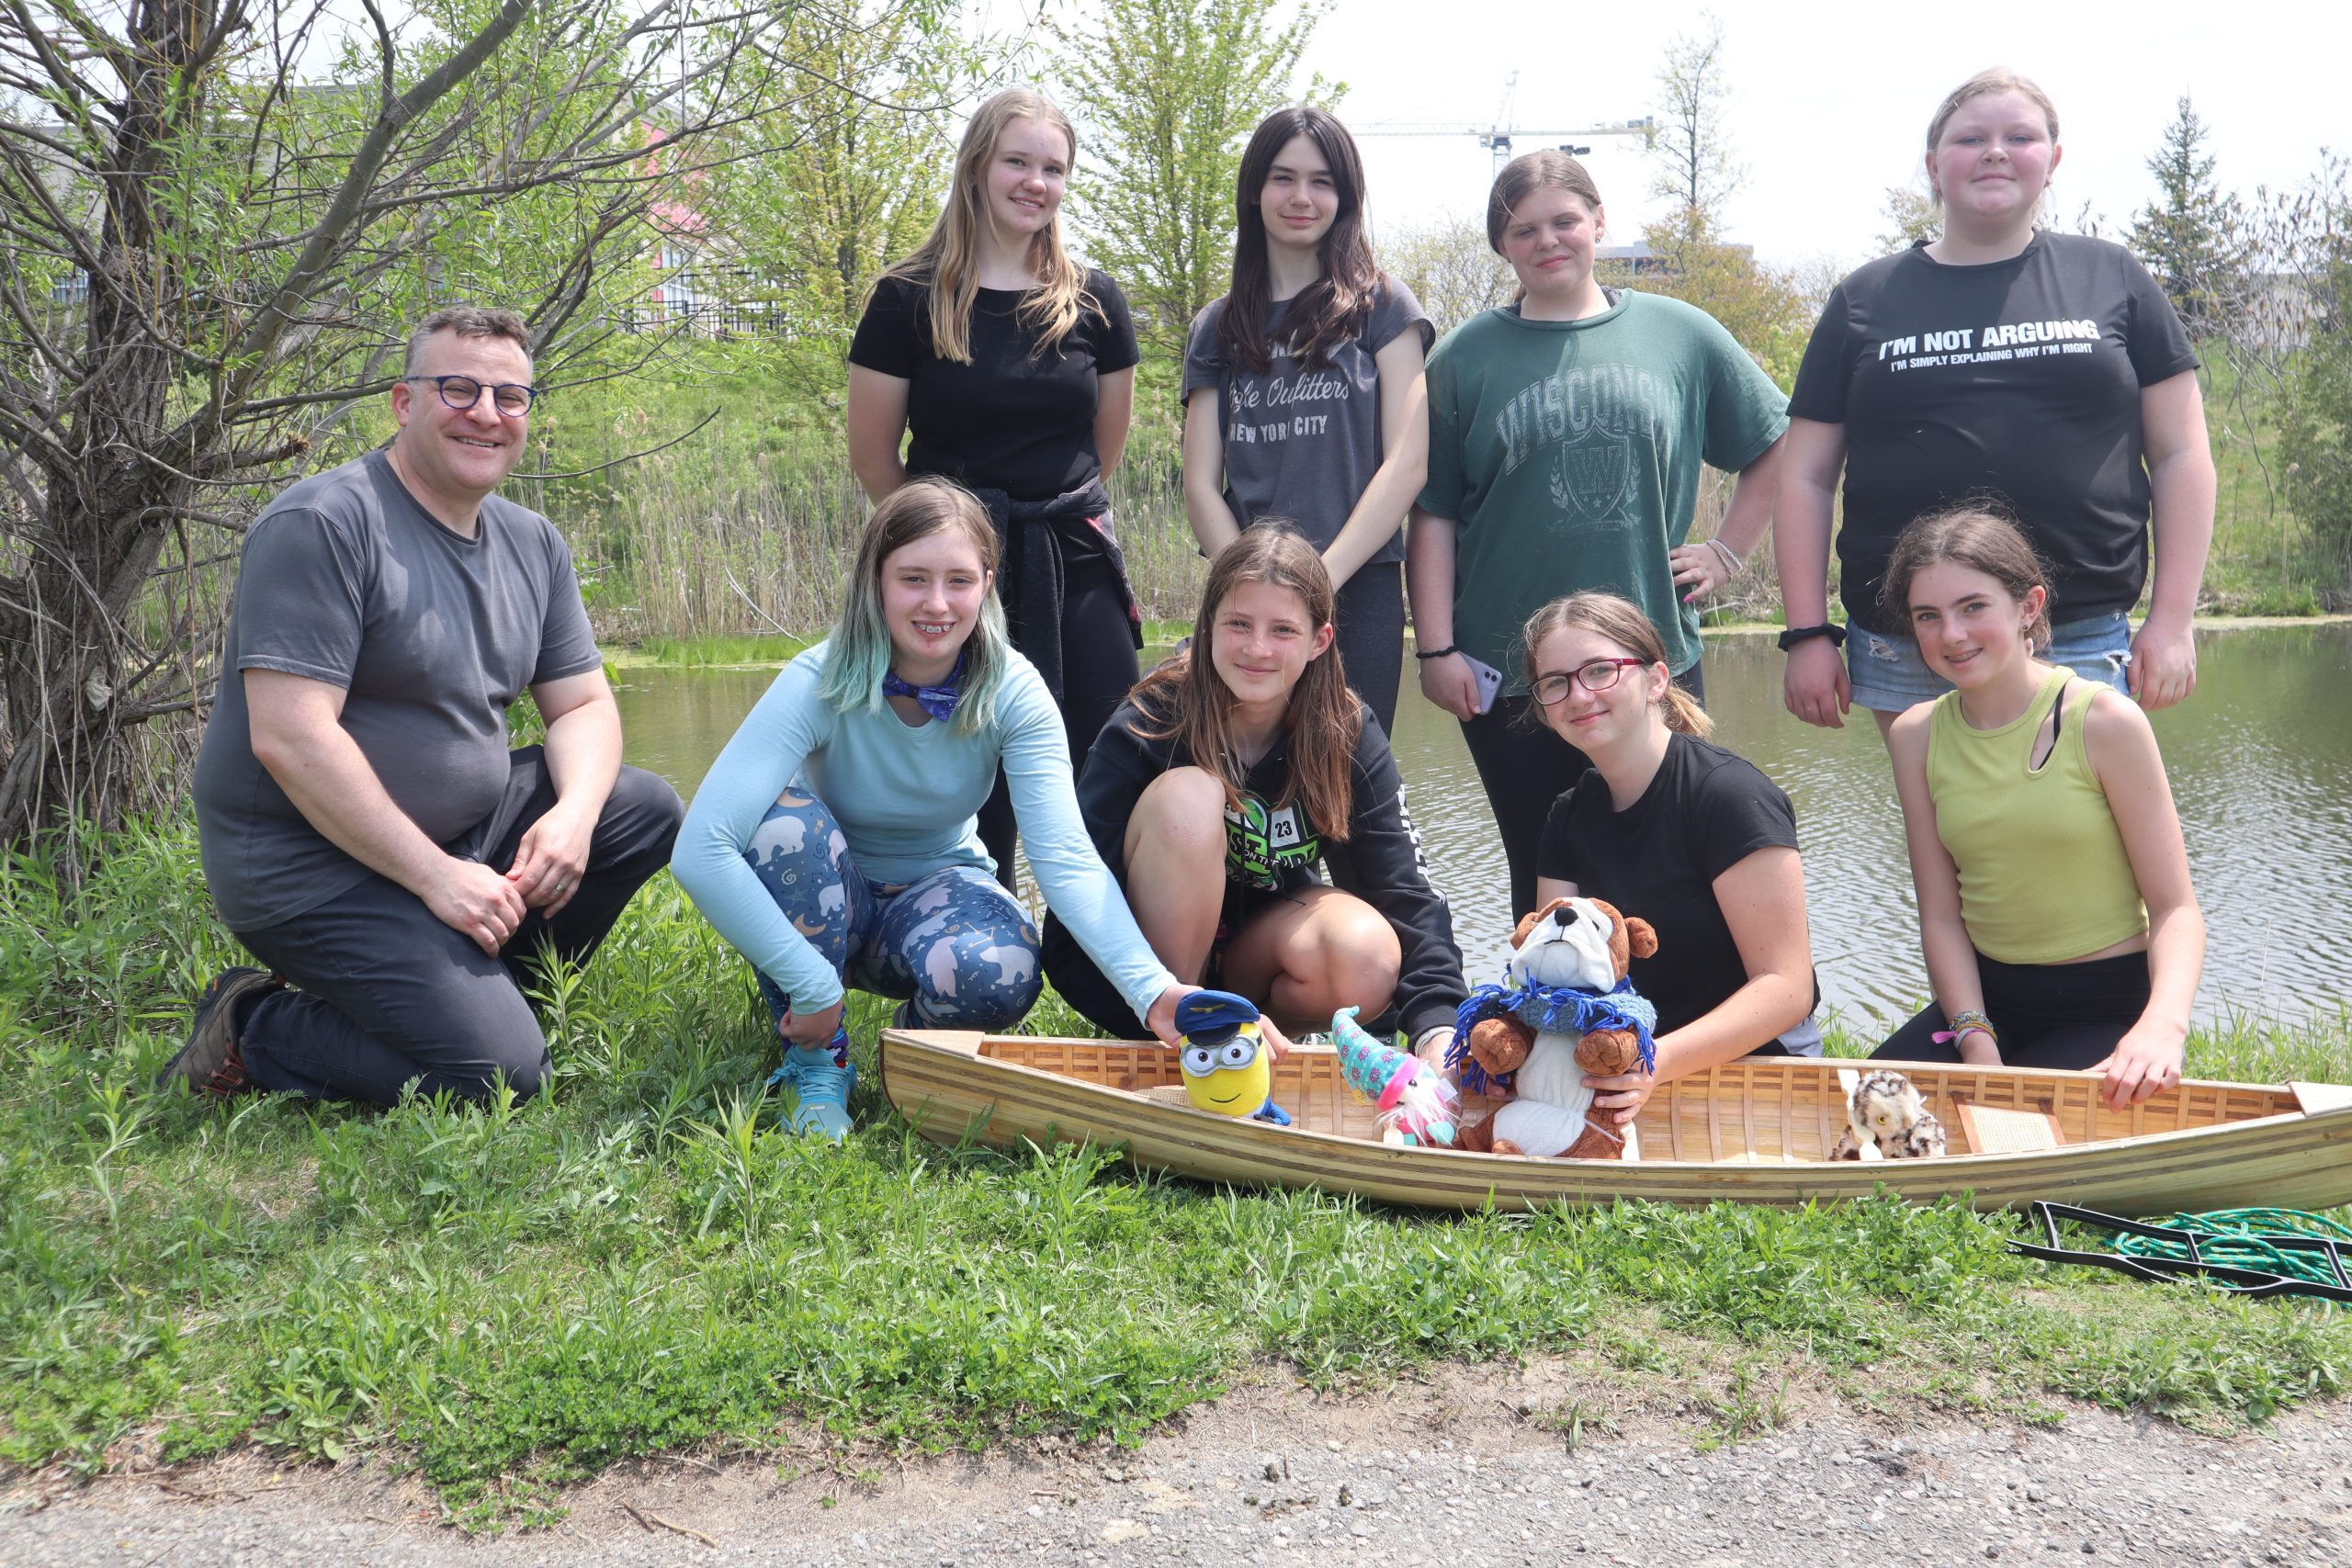 This photo features a group of 8 female students and 1 male teacher smiling and posing with their model canoe filled with stuff toys.